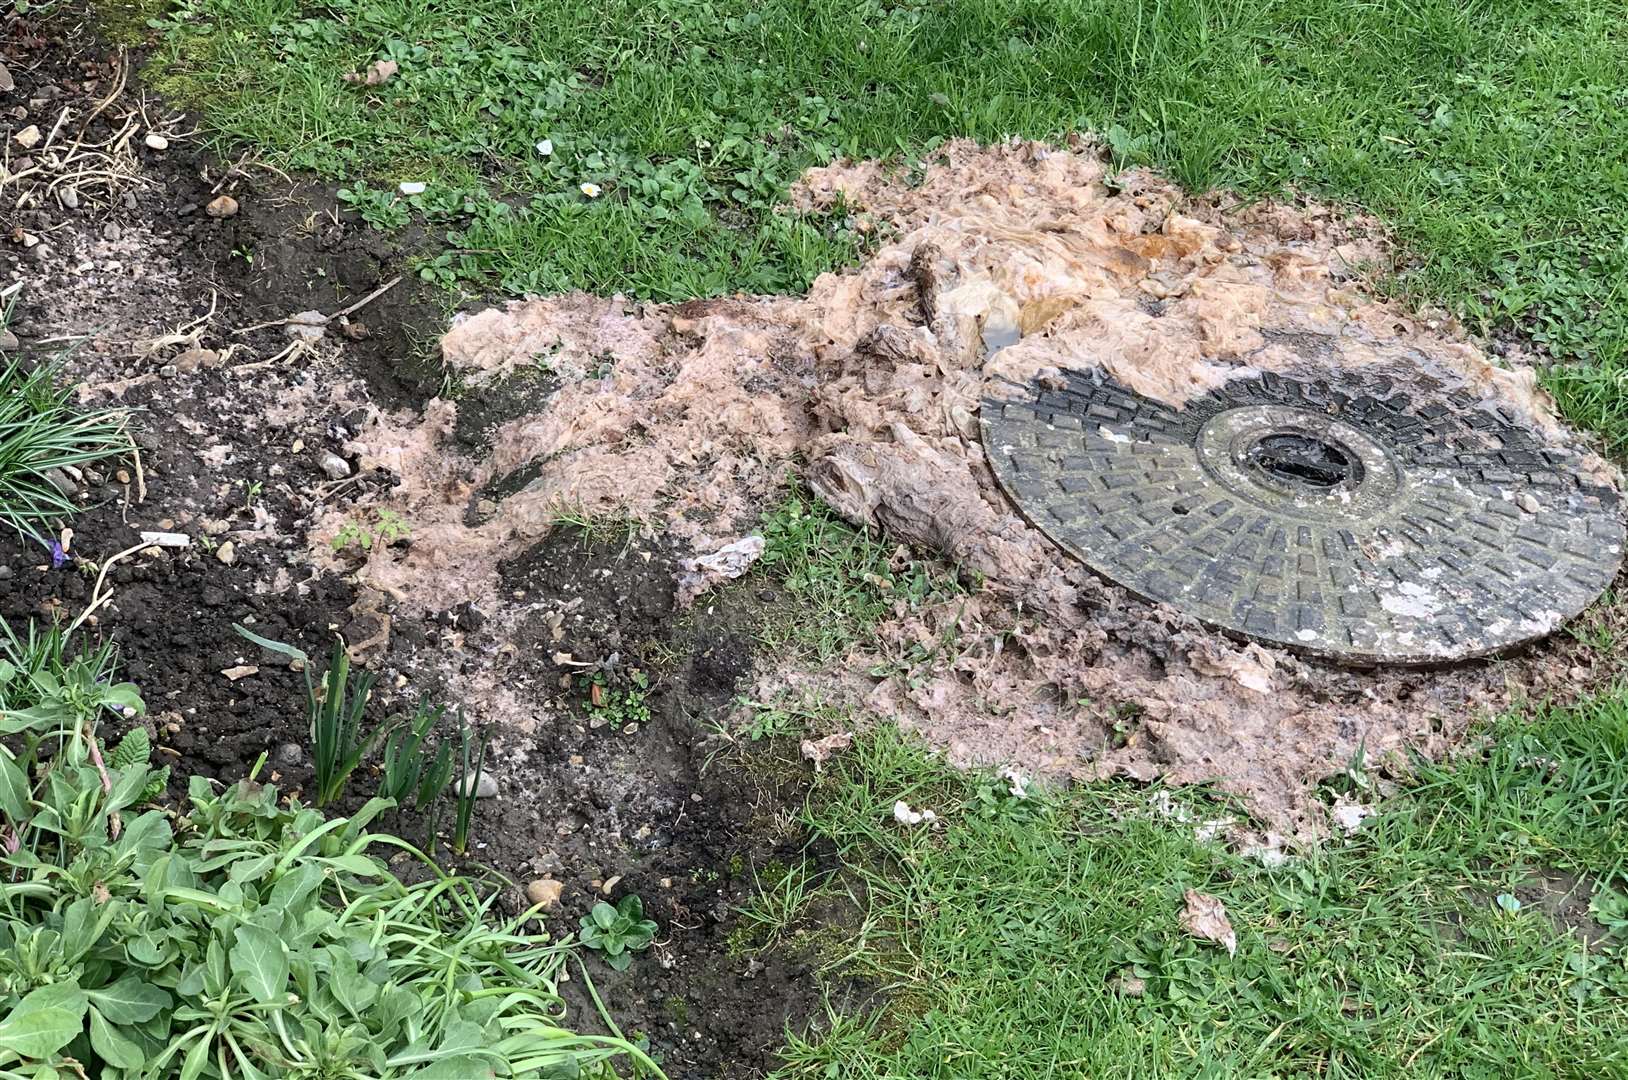 Raw sewage leaked from a drain at retirement complex for nearly a week